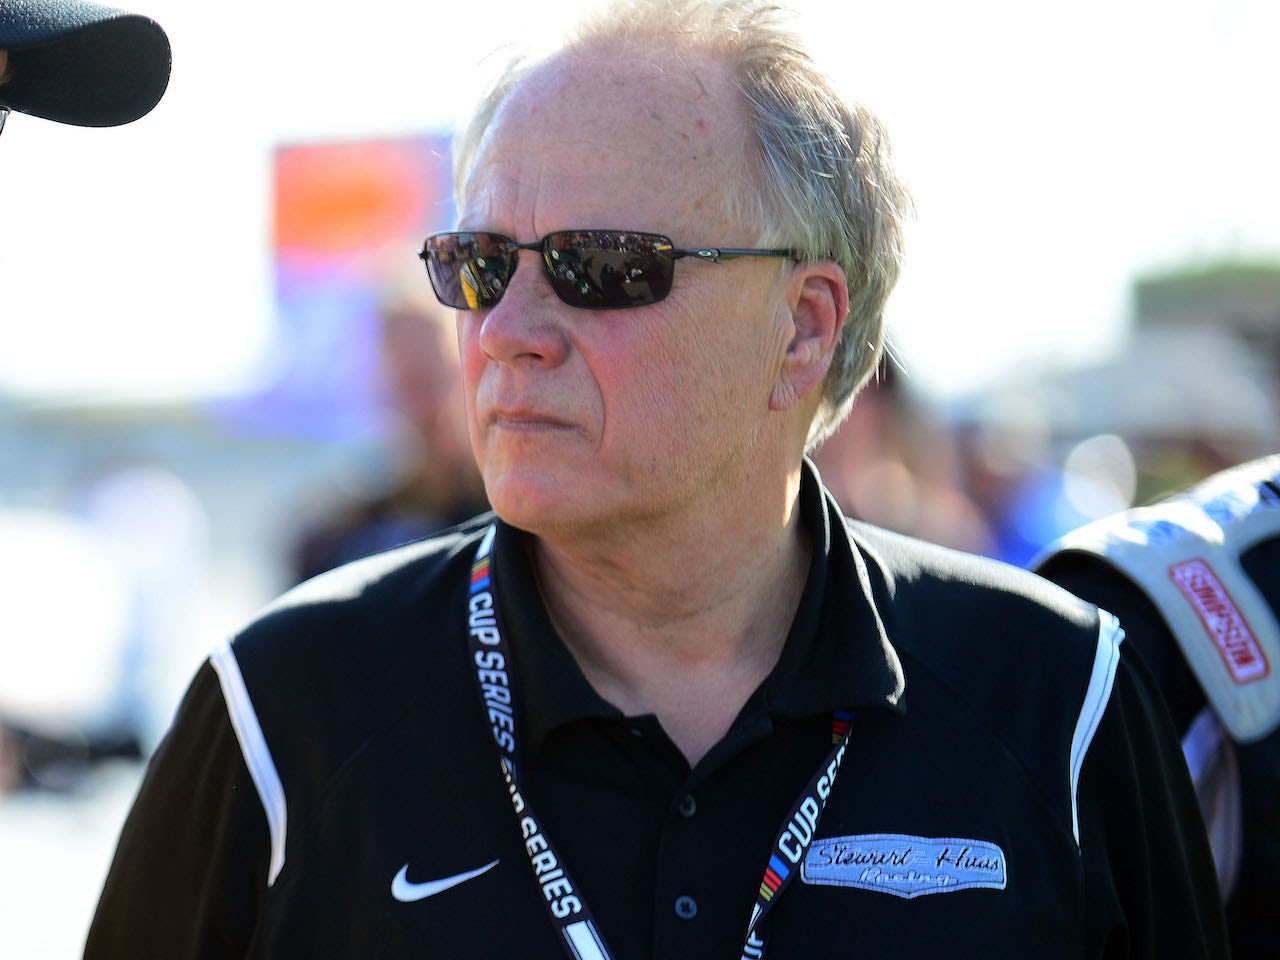 Haas F1 commitment in question amid Nascar exit